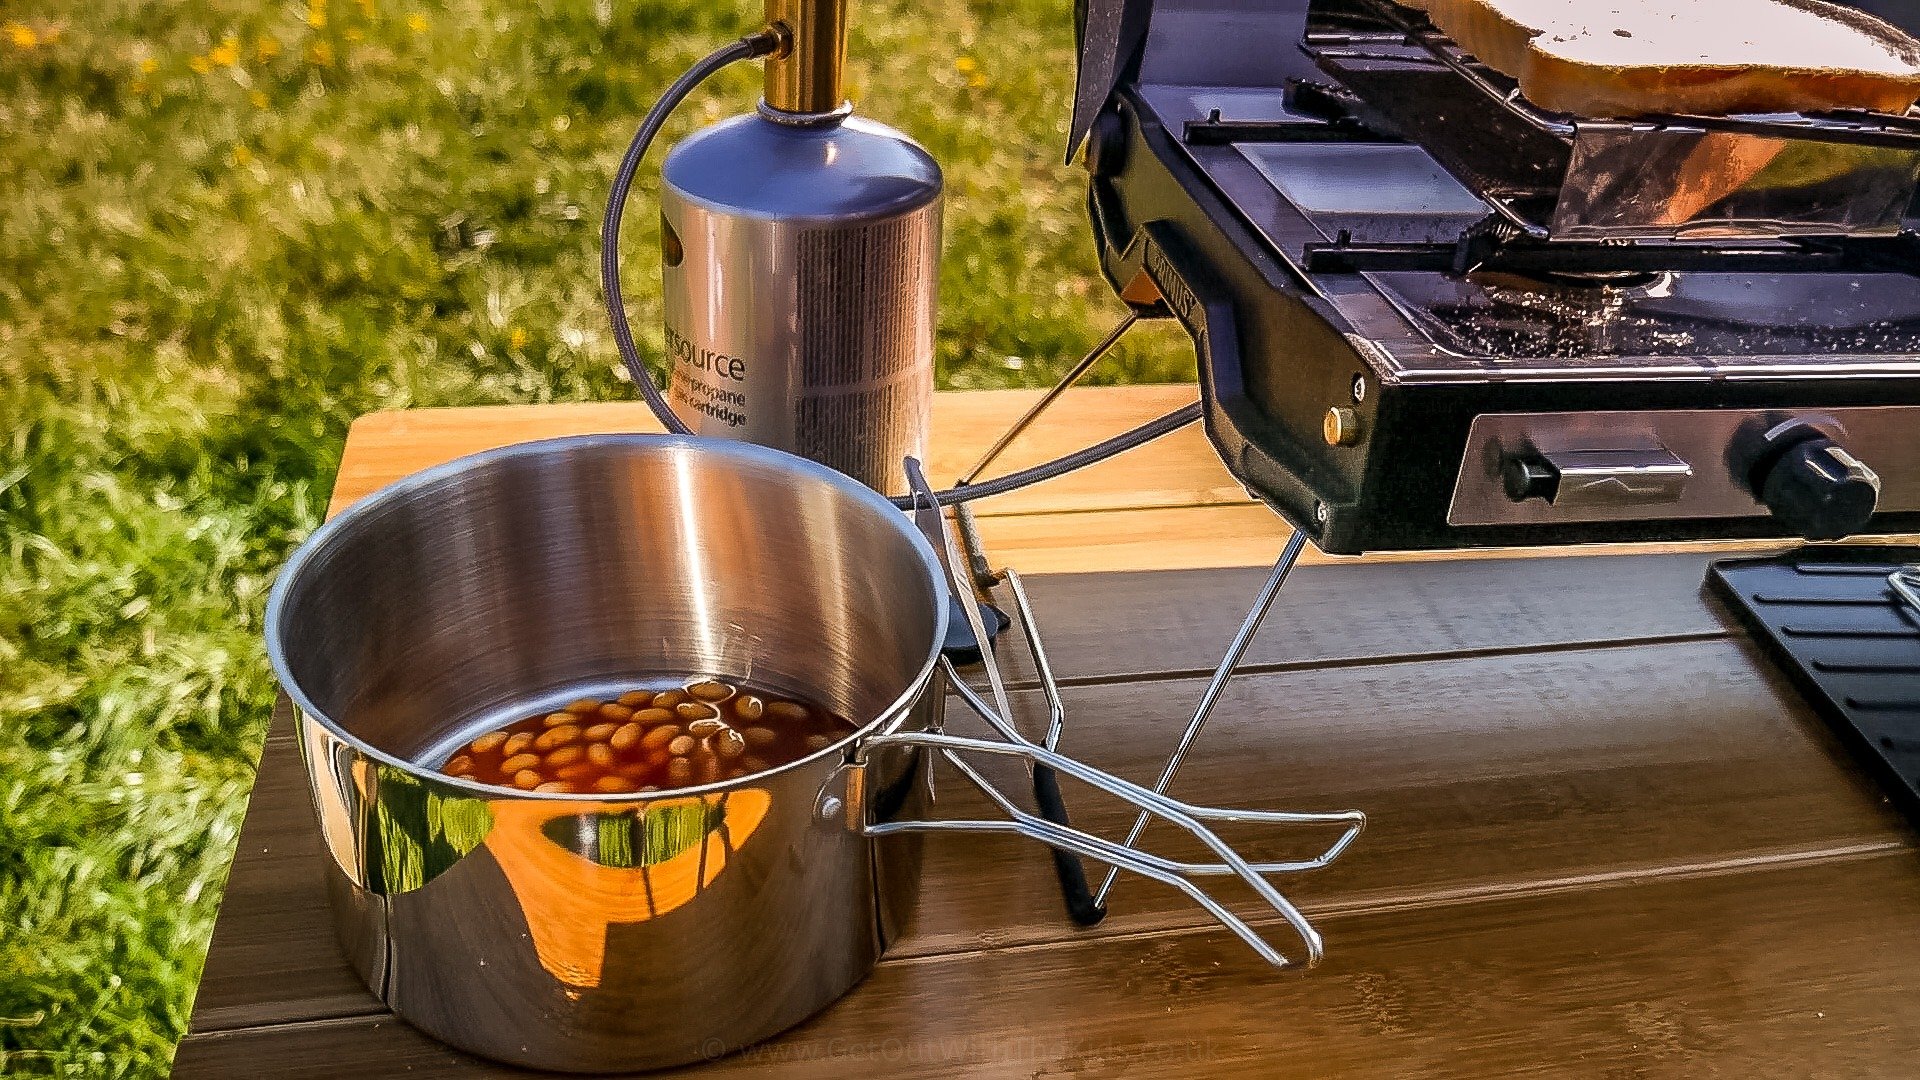 The smaller pot in the Primus Campfire Cookset